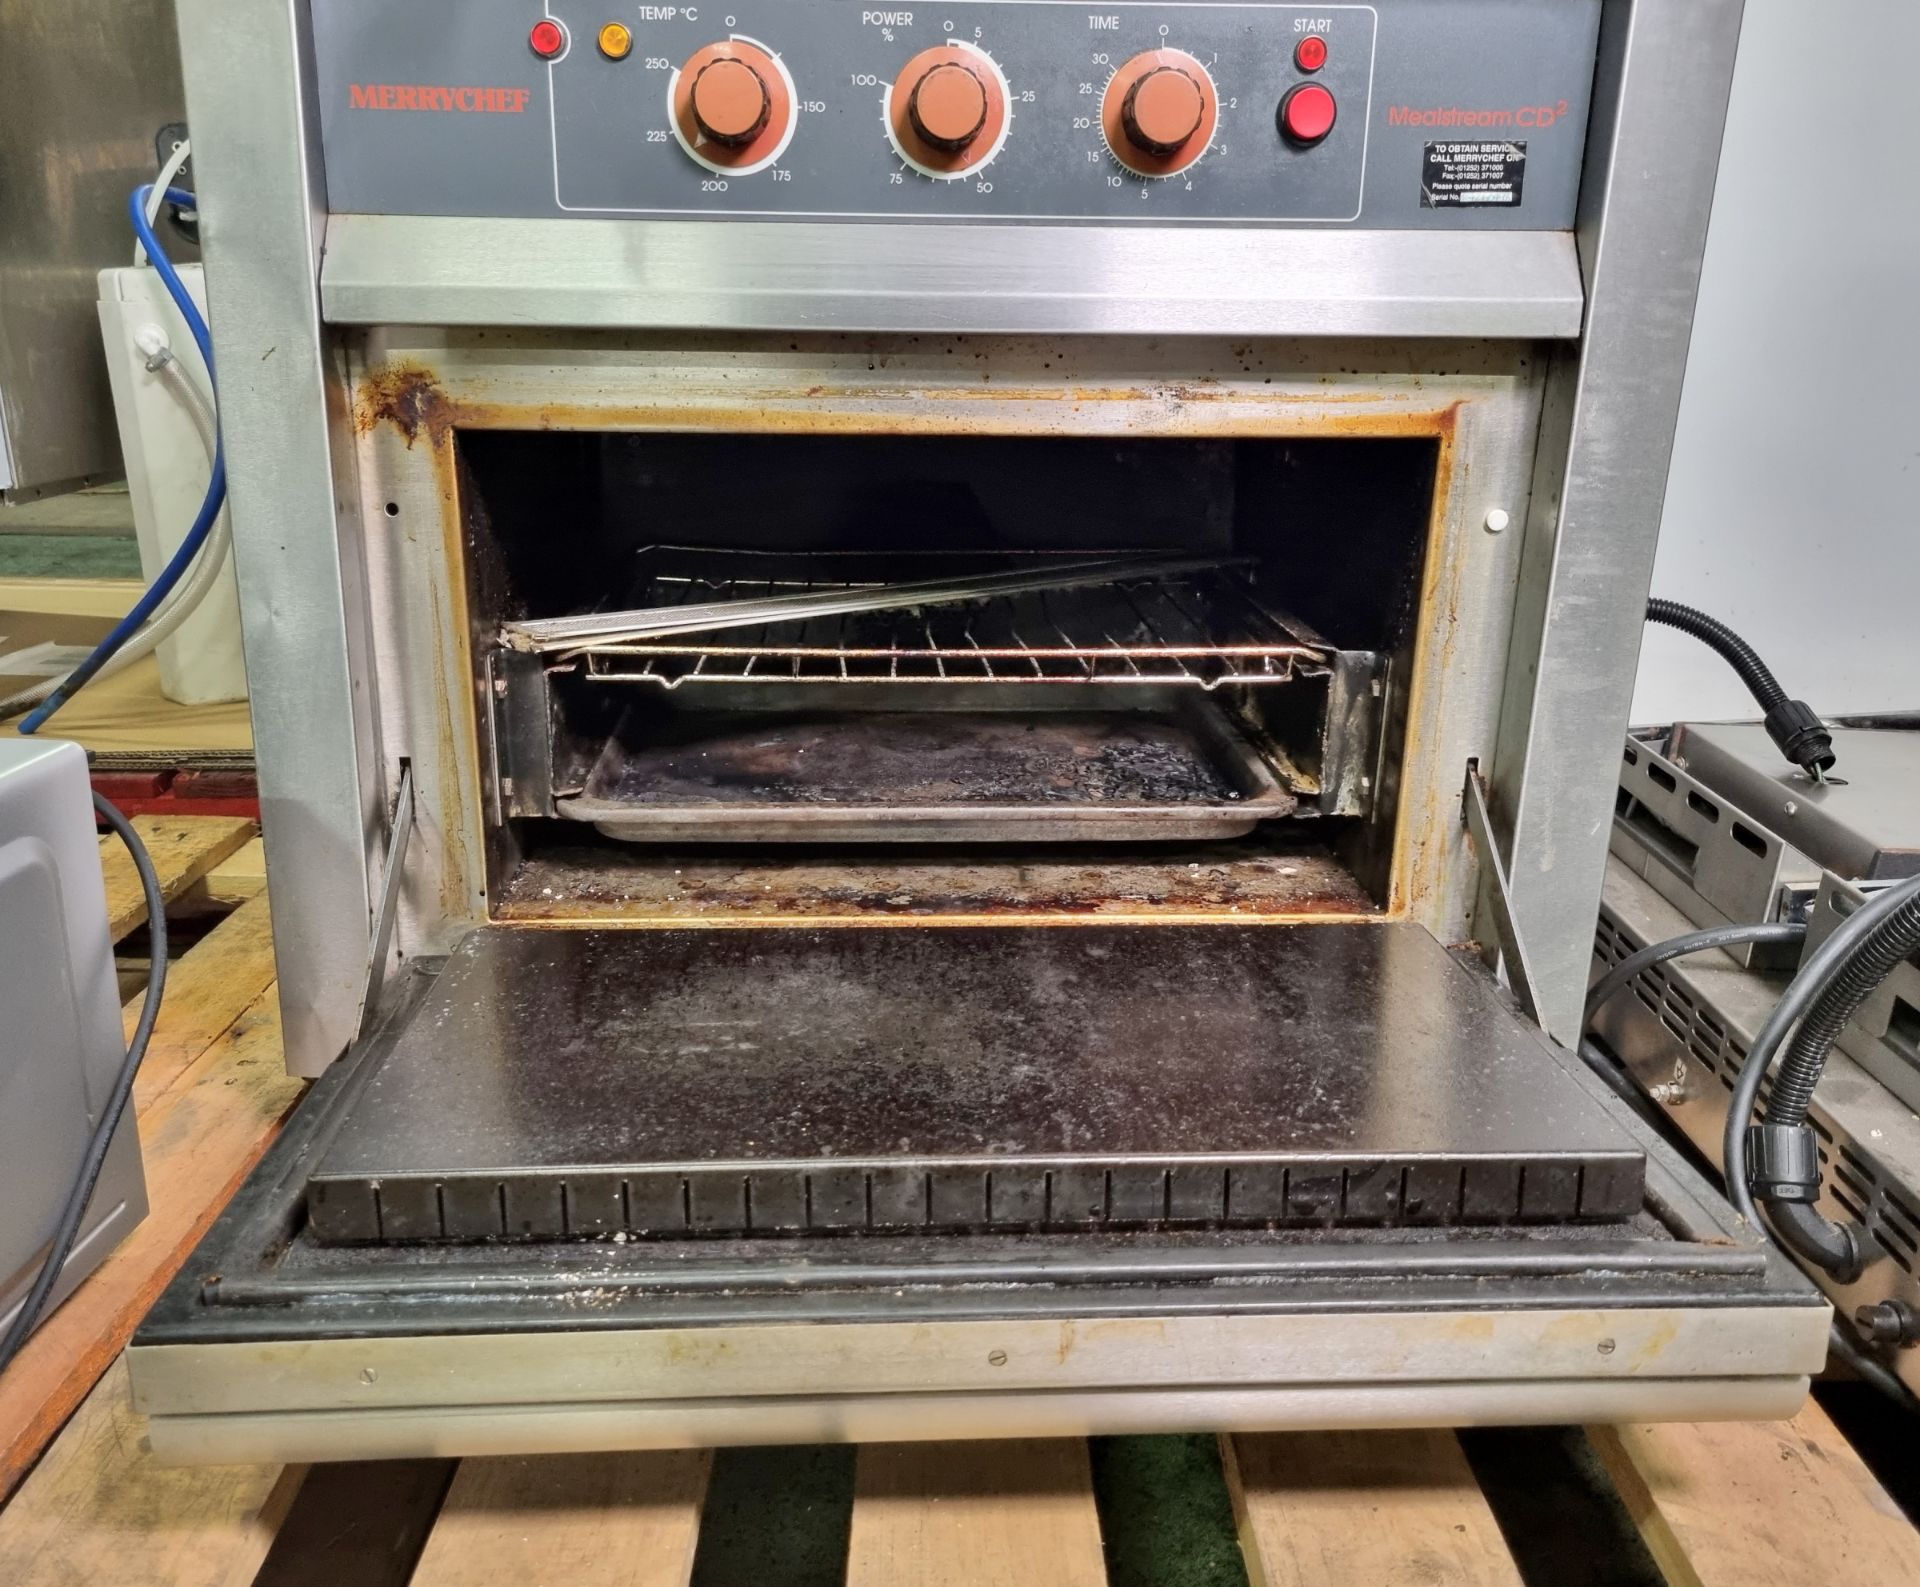 Merrychef MIS GD 2 electric oven - 60x71x65cm - Image 4 of 6